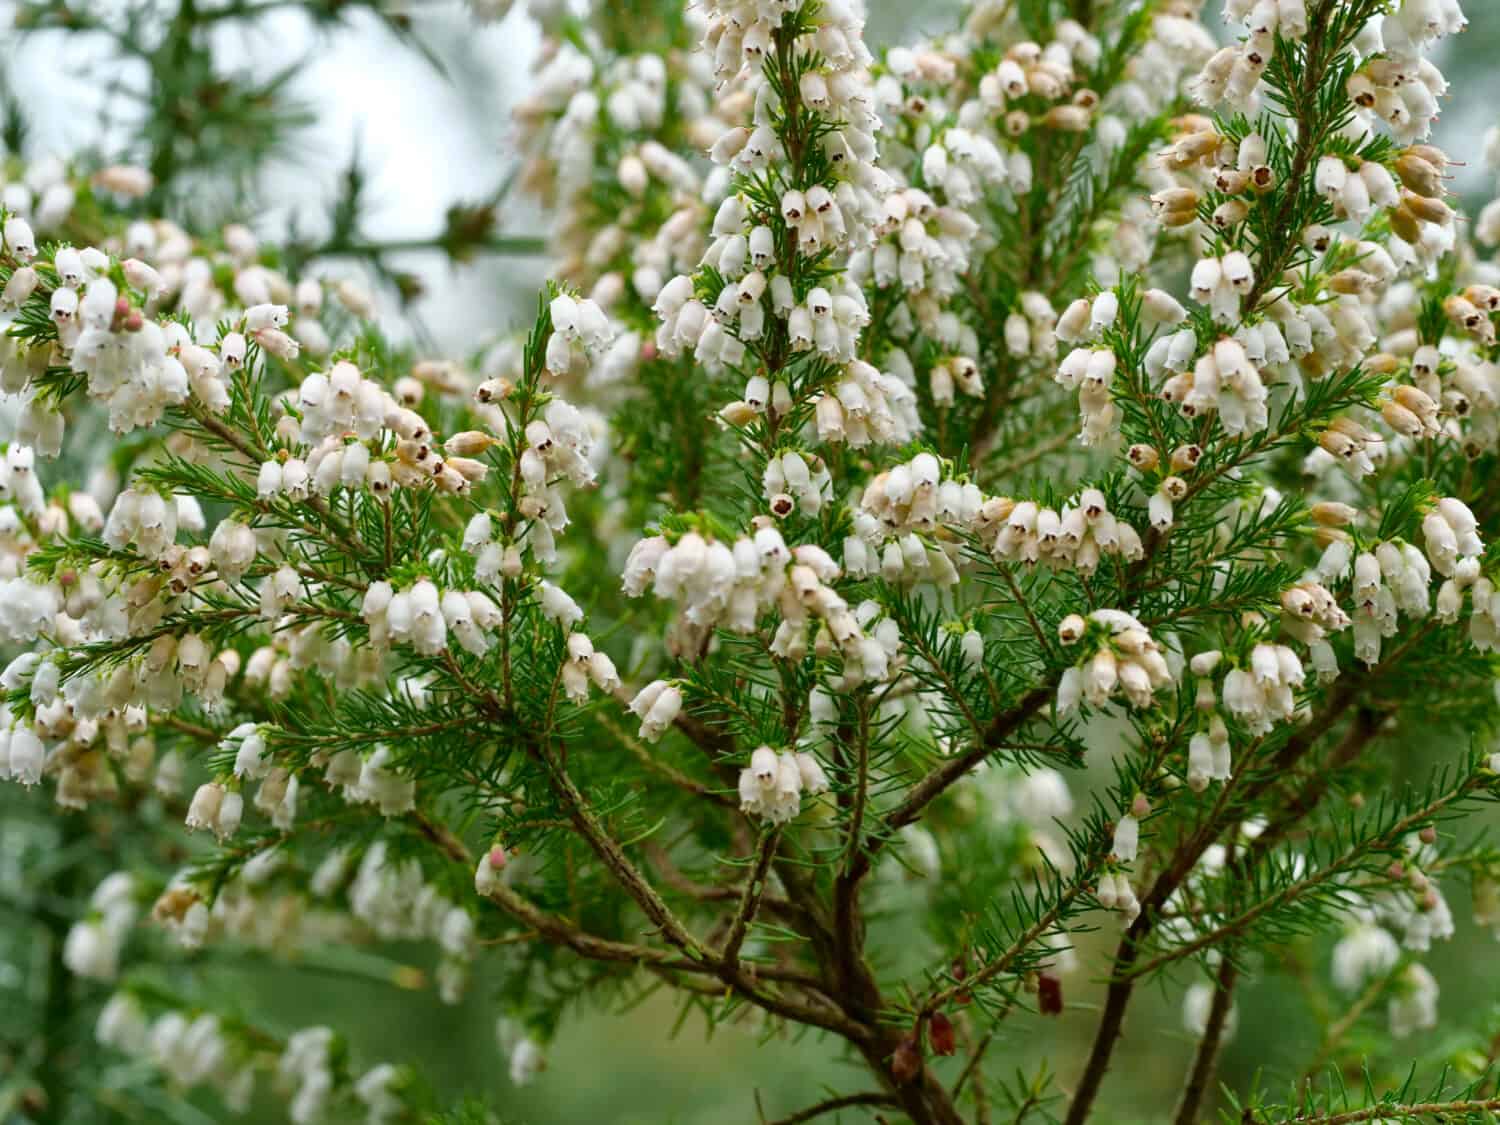 Erica lusitanica is a species of flowering plant in the family Ericaceae, known by the common names Portuguese heath and Spanish heath.